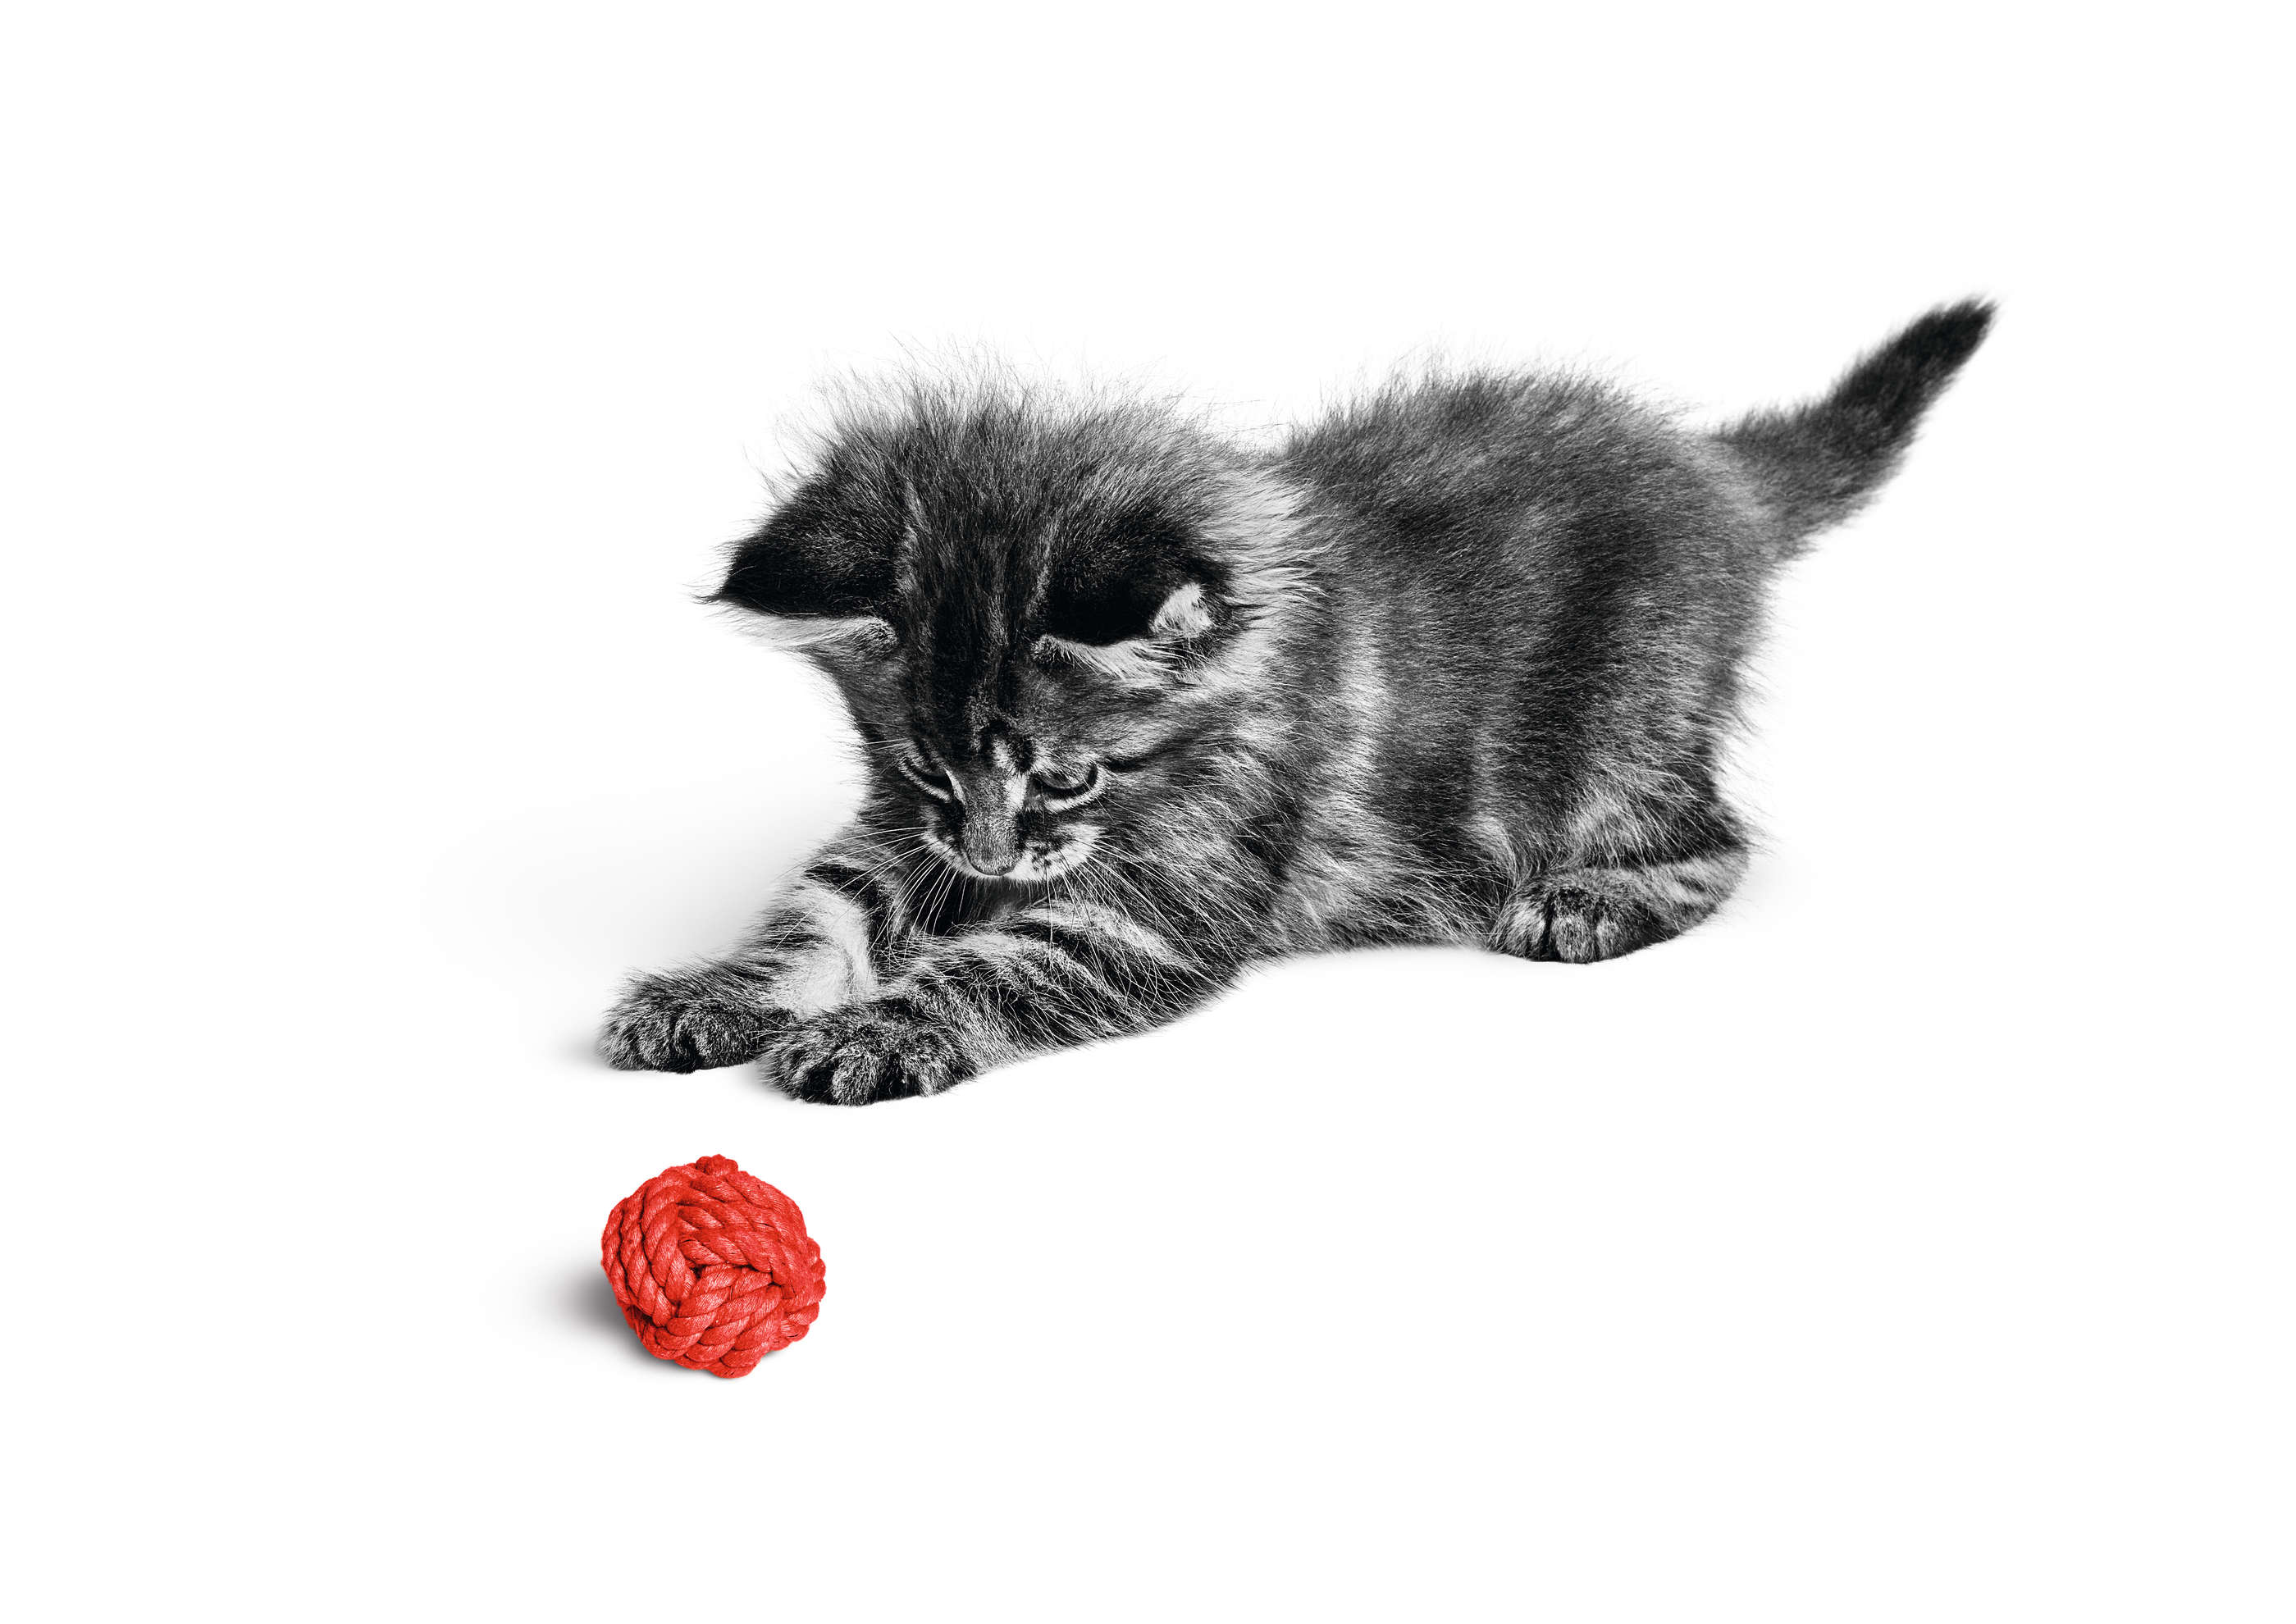 Maine Coon kitten in black and white playing with a red ball